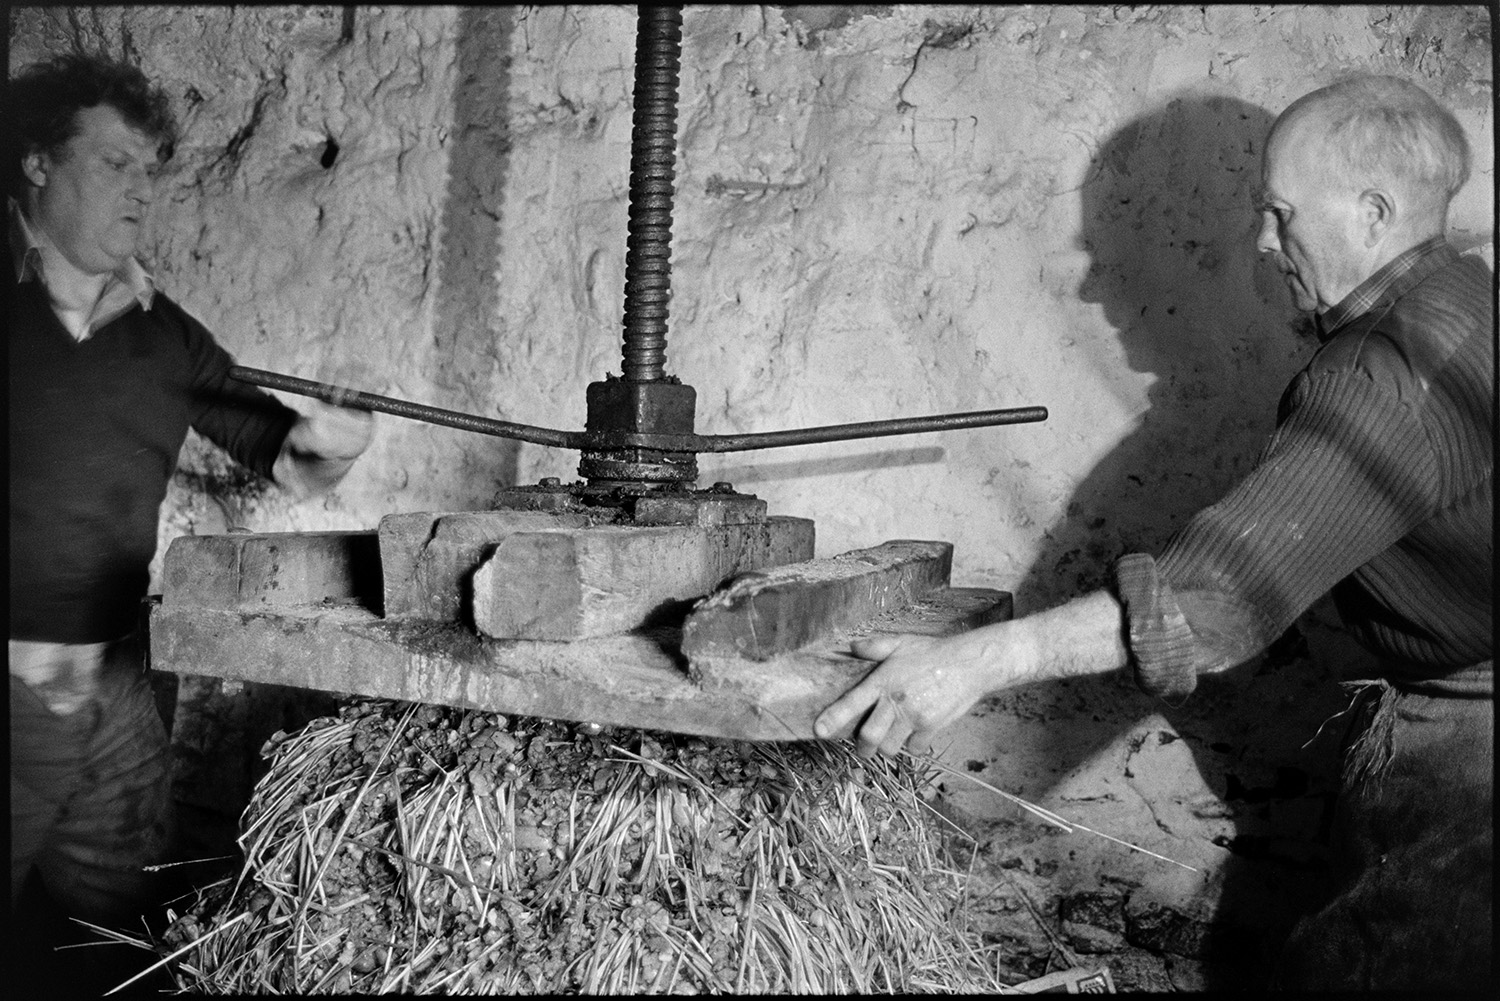 Orchards, Devon, man operating cider press, making cheese. 
[Bill Hammond, on the left, and another man operating a cider press in a barn at Rashleigh Mill, Bridge Reeve. It is compressing the cheese which is layers of apple pulp and straw.]